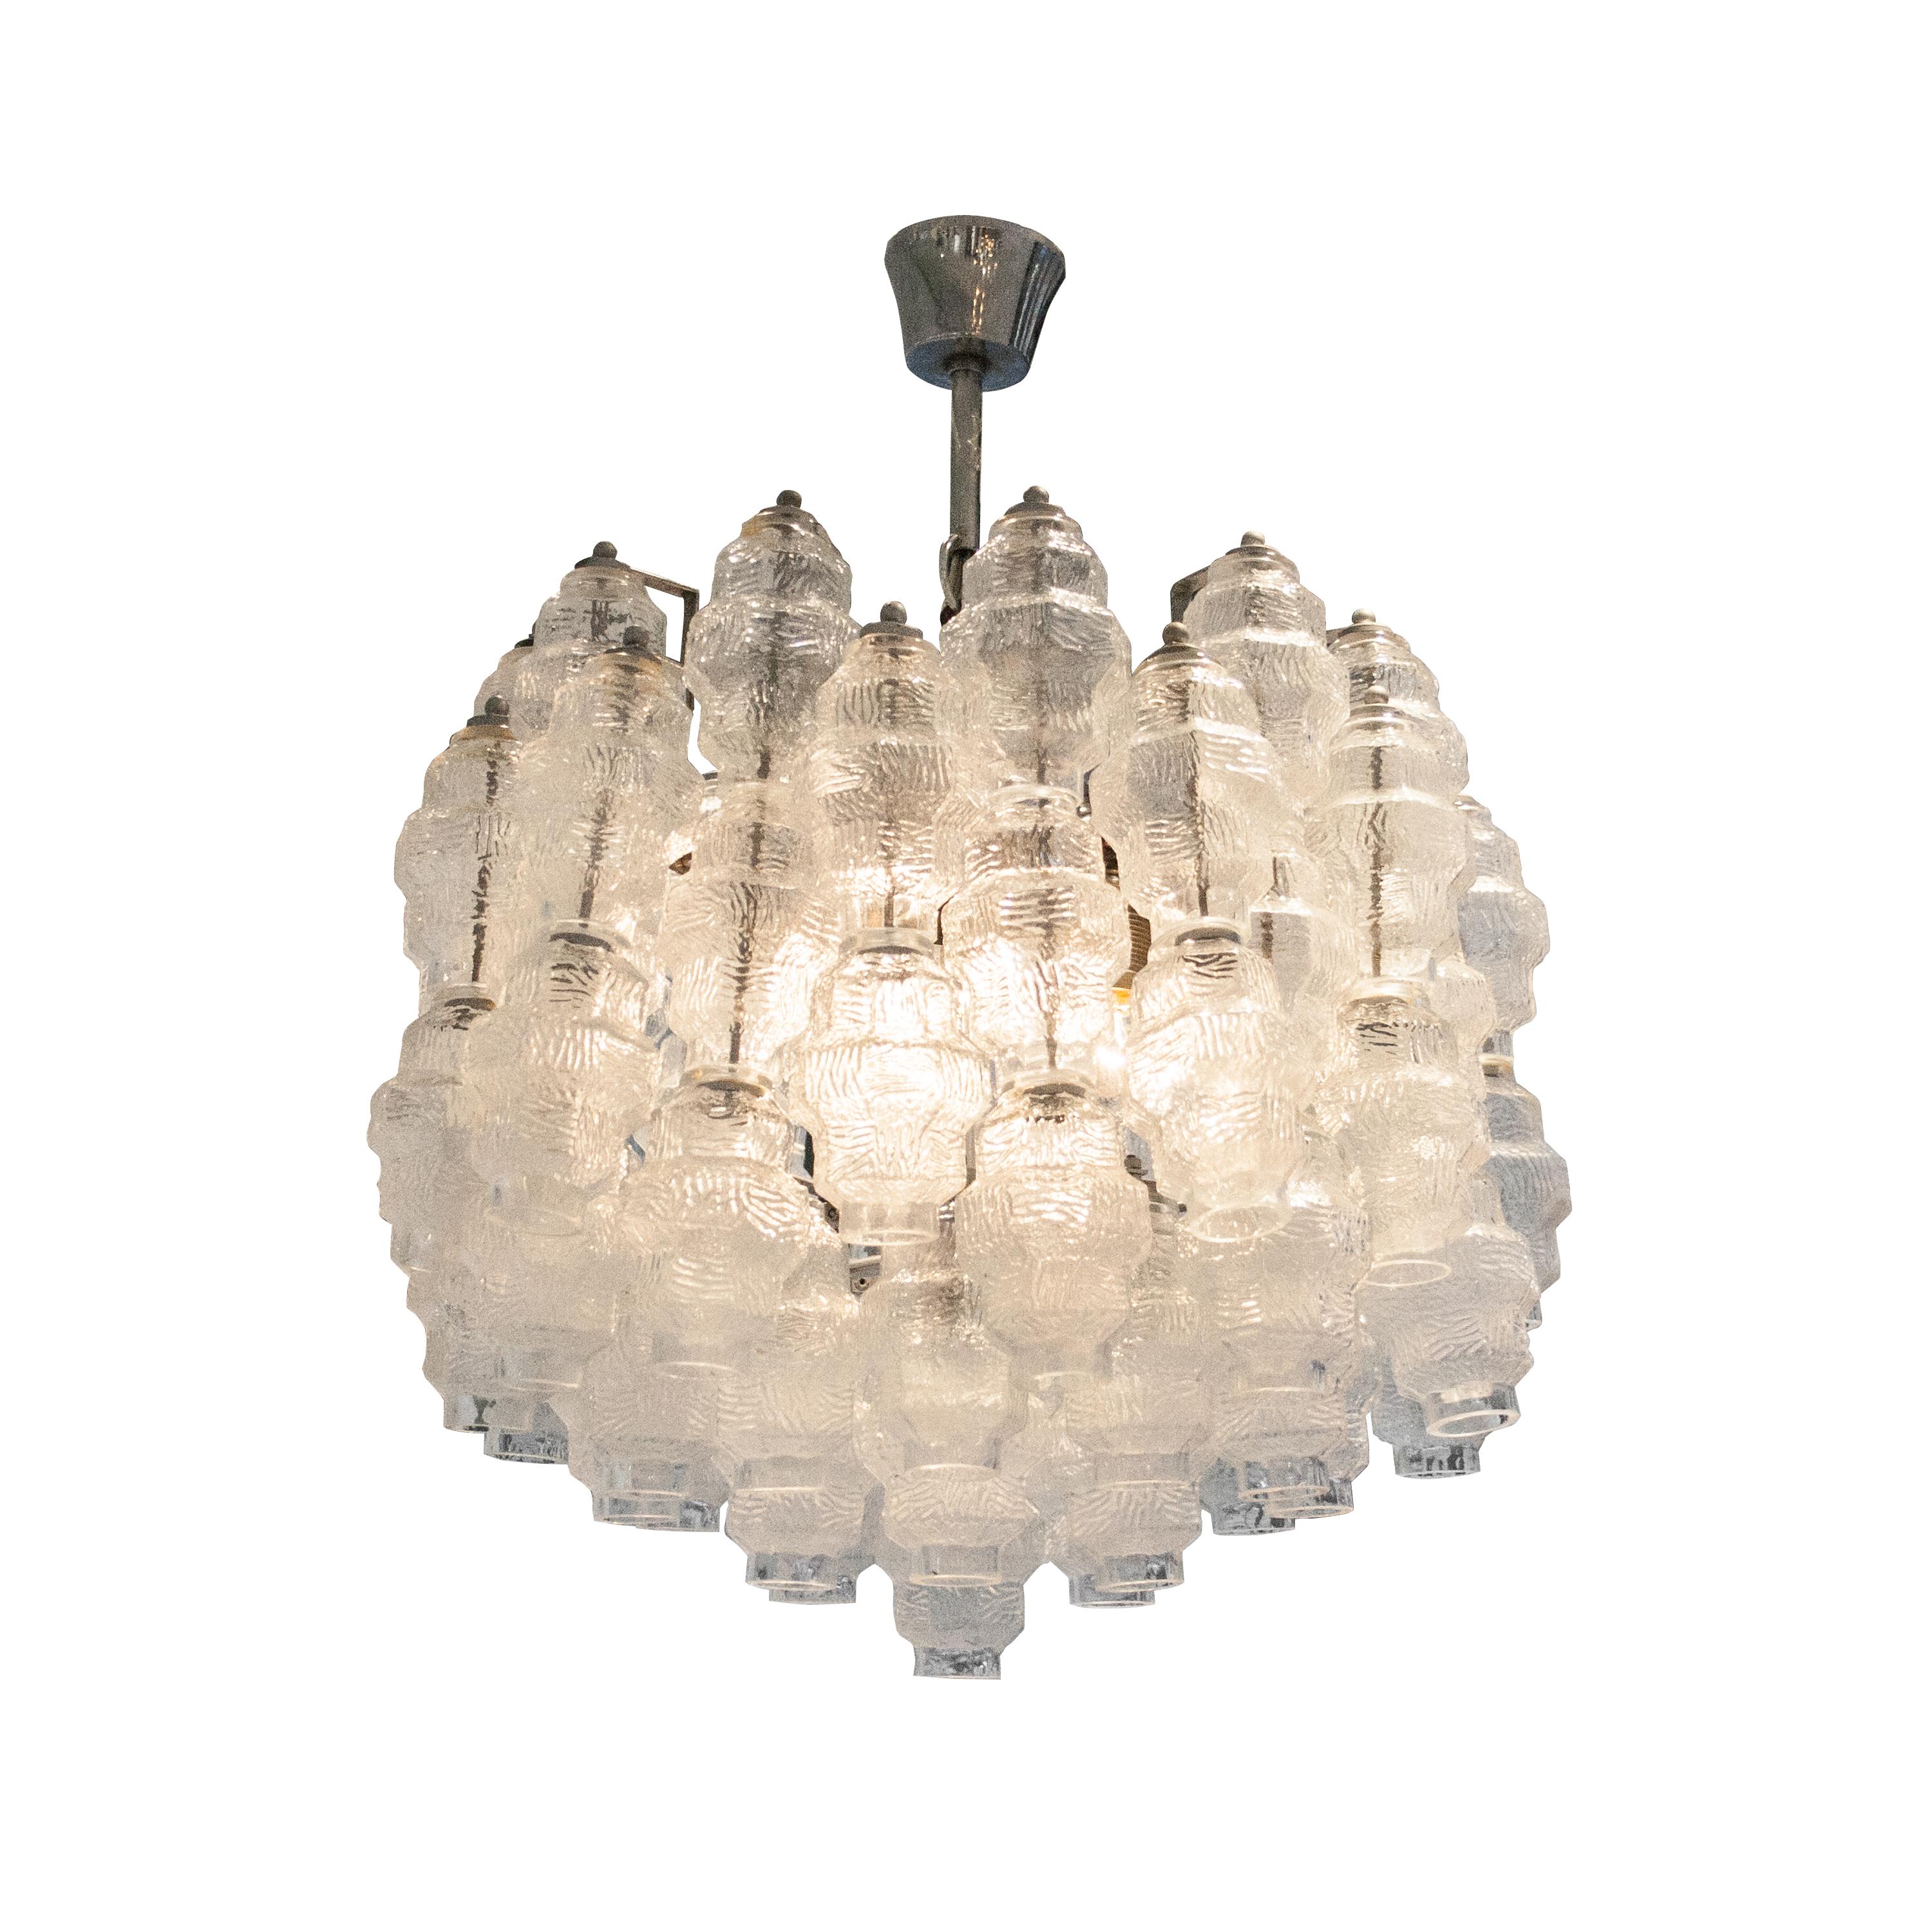 Murano glass chandelier. It is made up of a chromed steel structure that supports 80 pieces of hand-blown Murano glass with 3 light points.